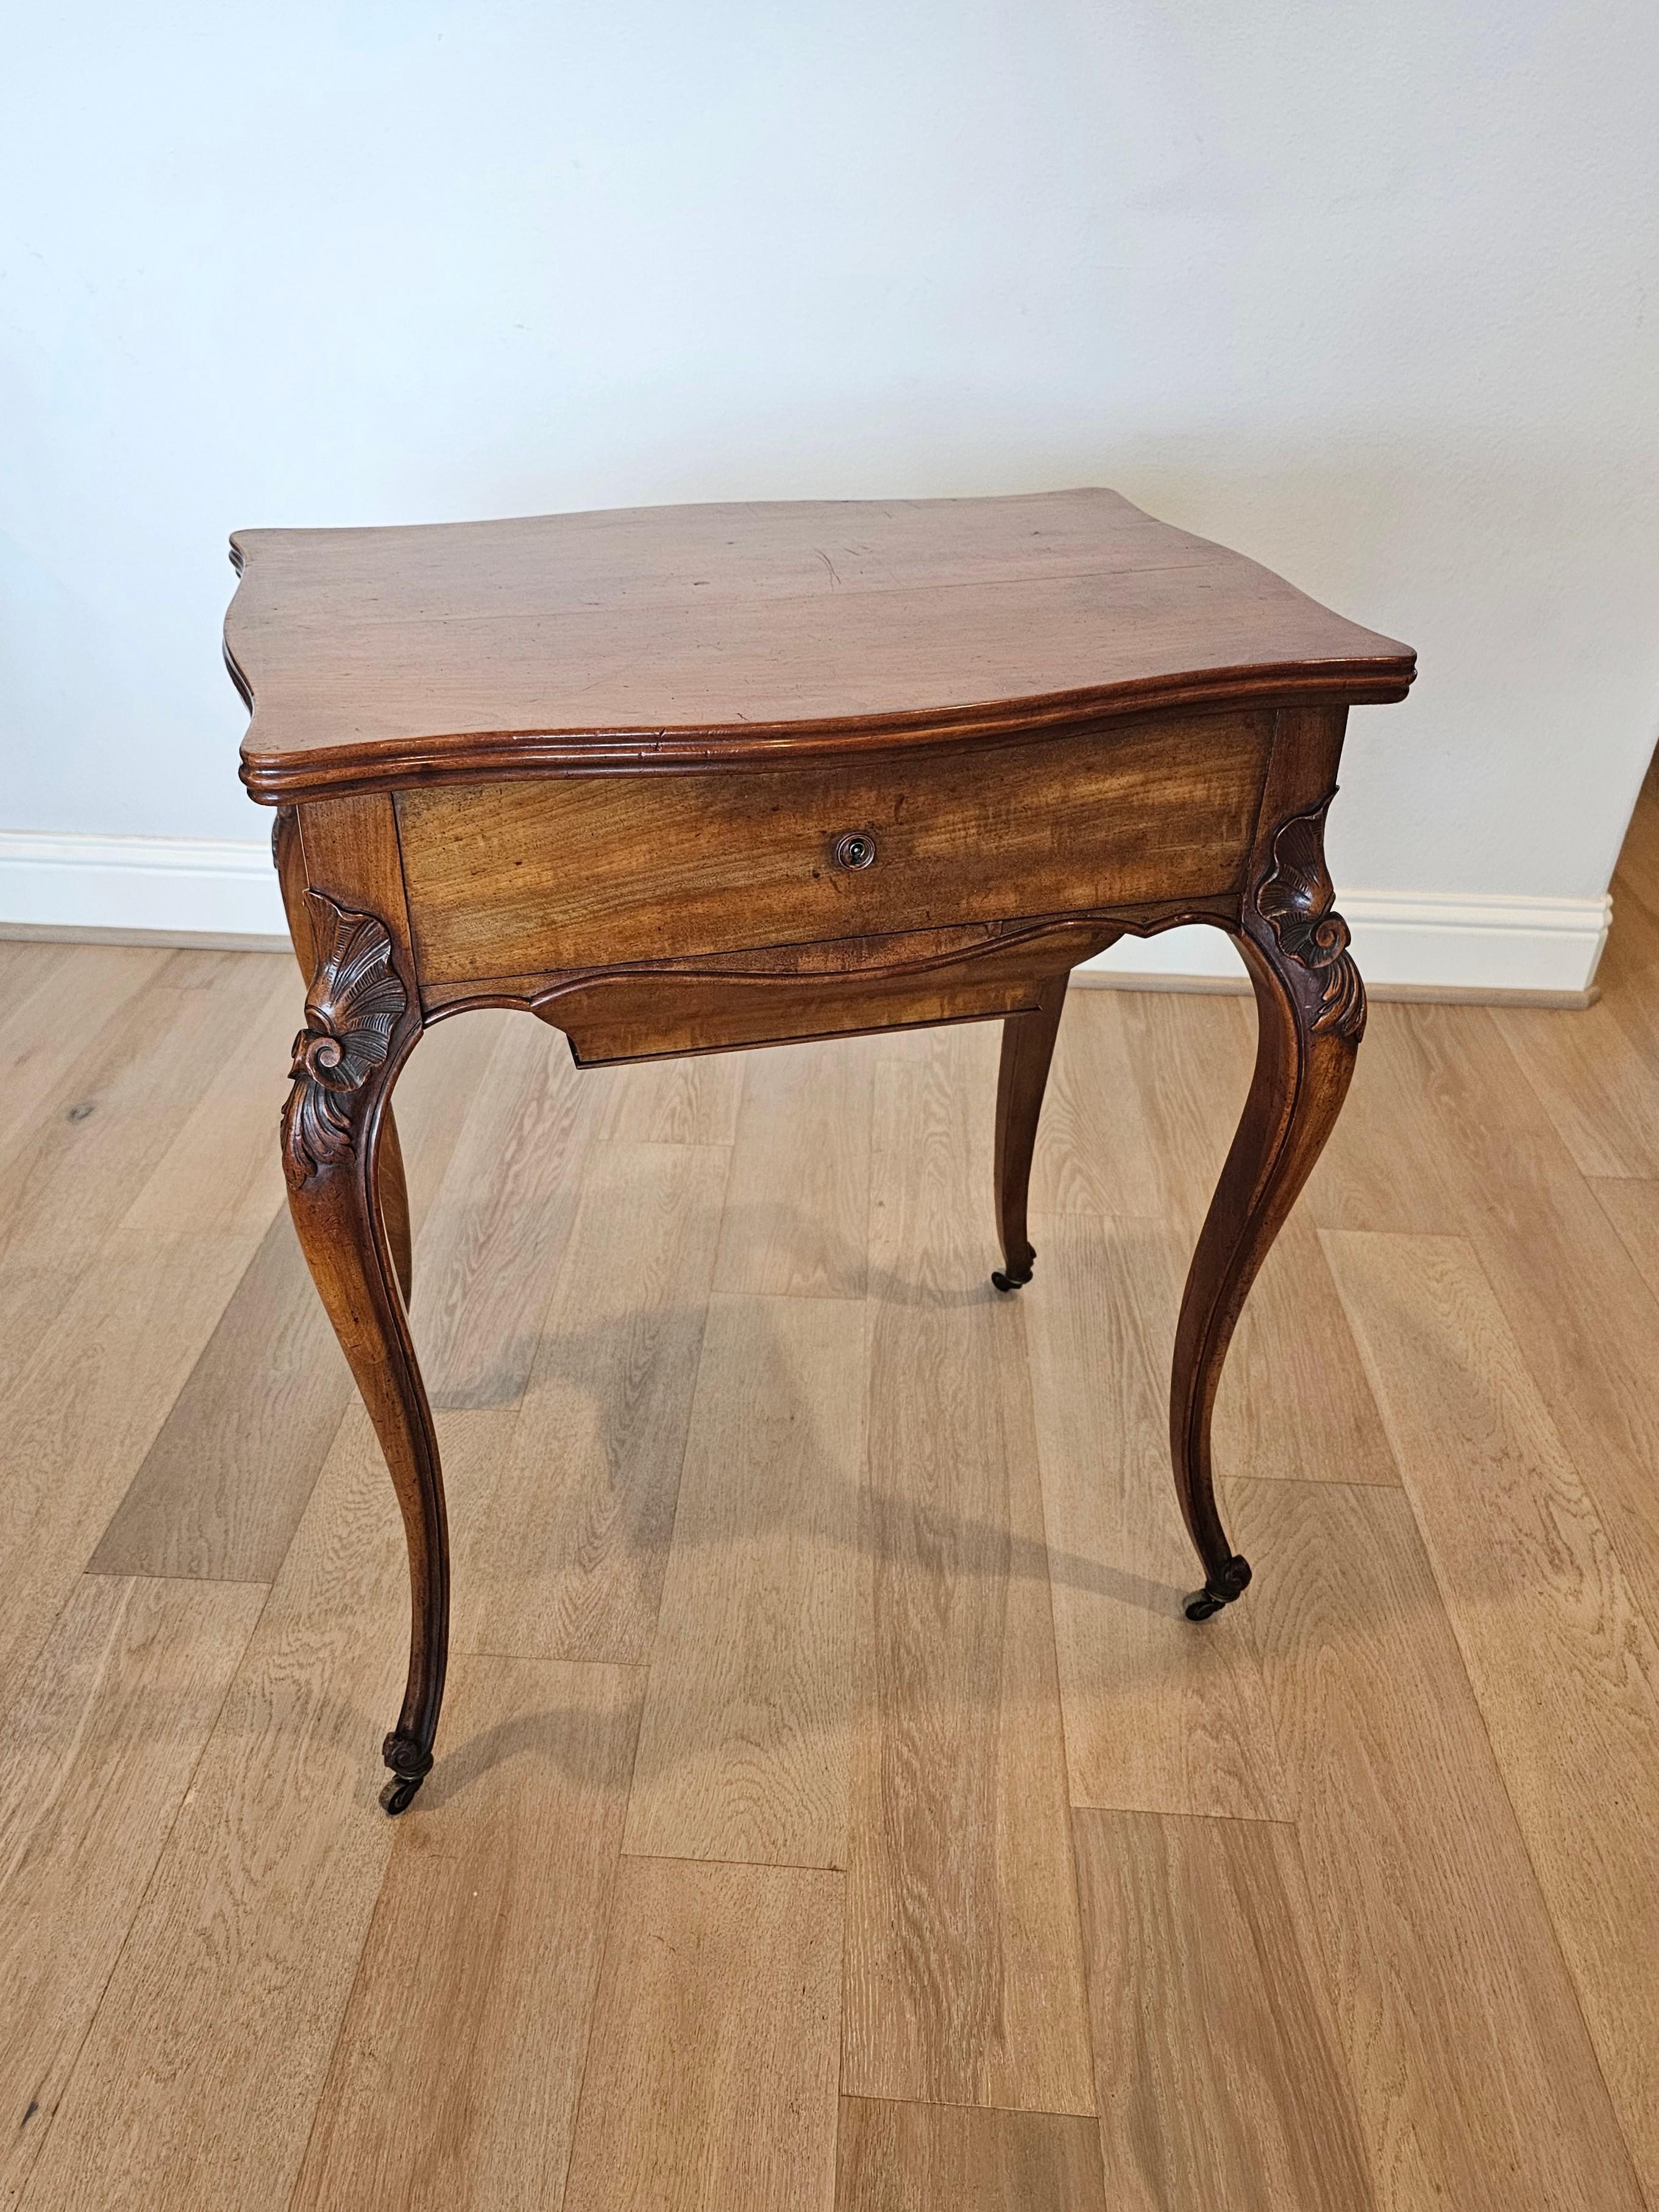 Antique French Ledet et fils Louis XV Ladies Sewing Work Table Dressing Vanity In Good Condition For Sale In Forney, TX